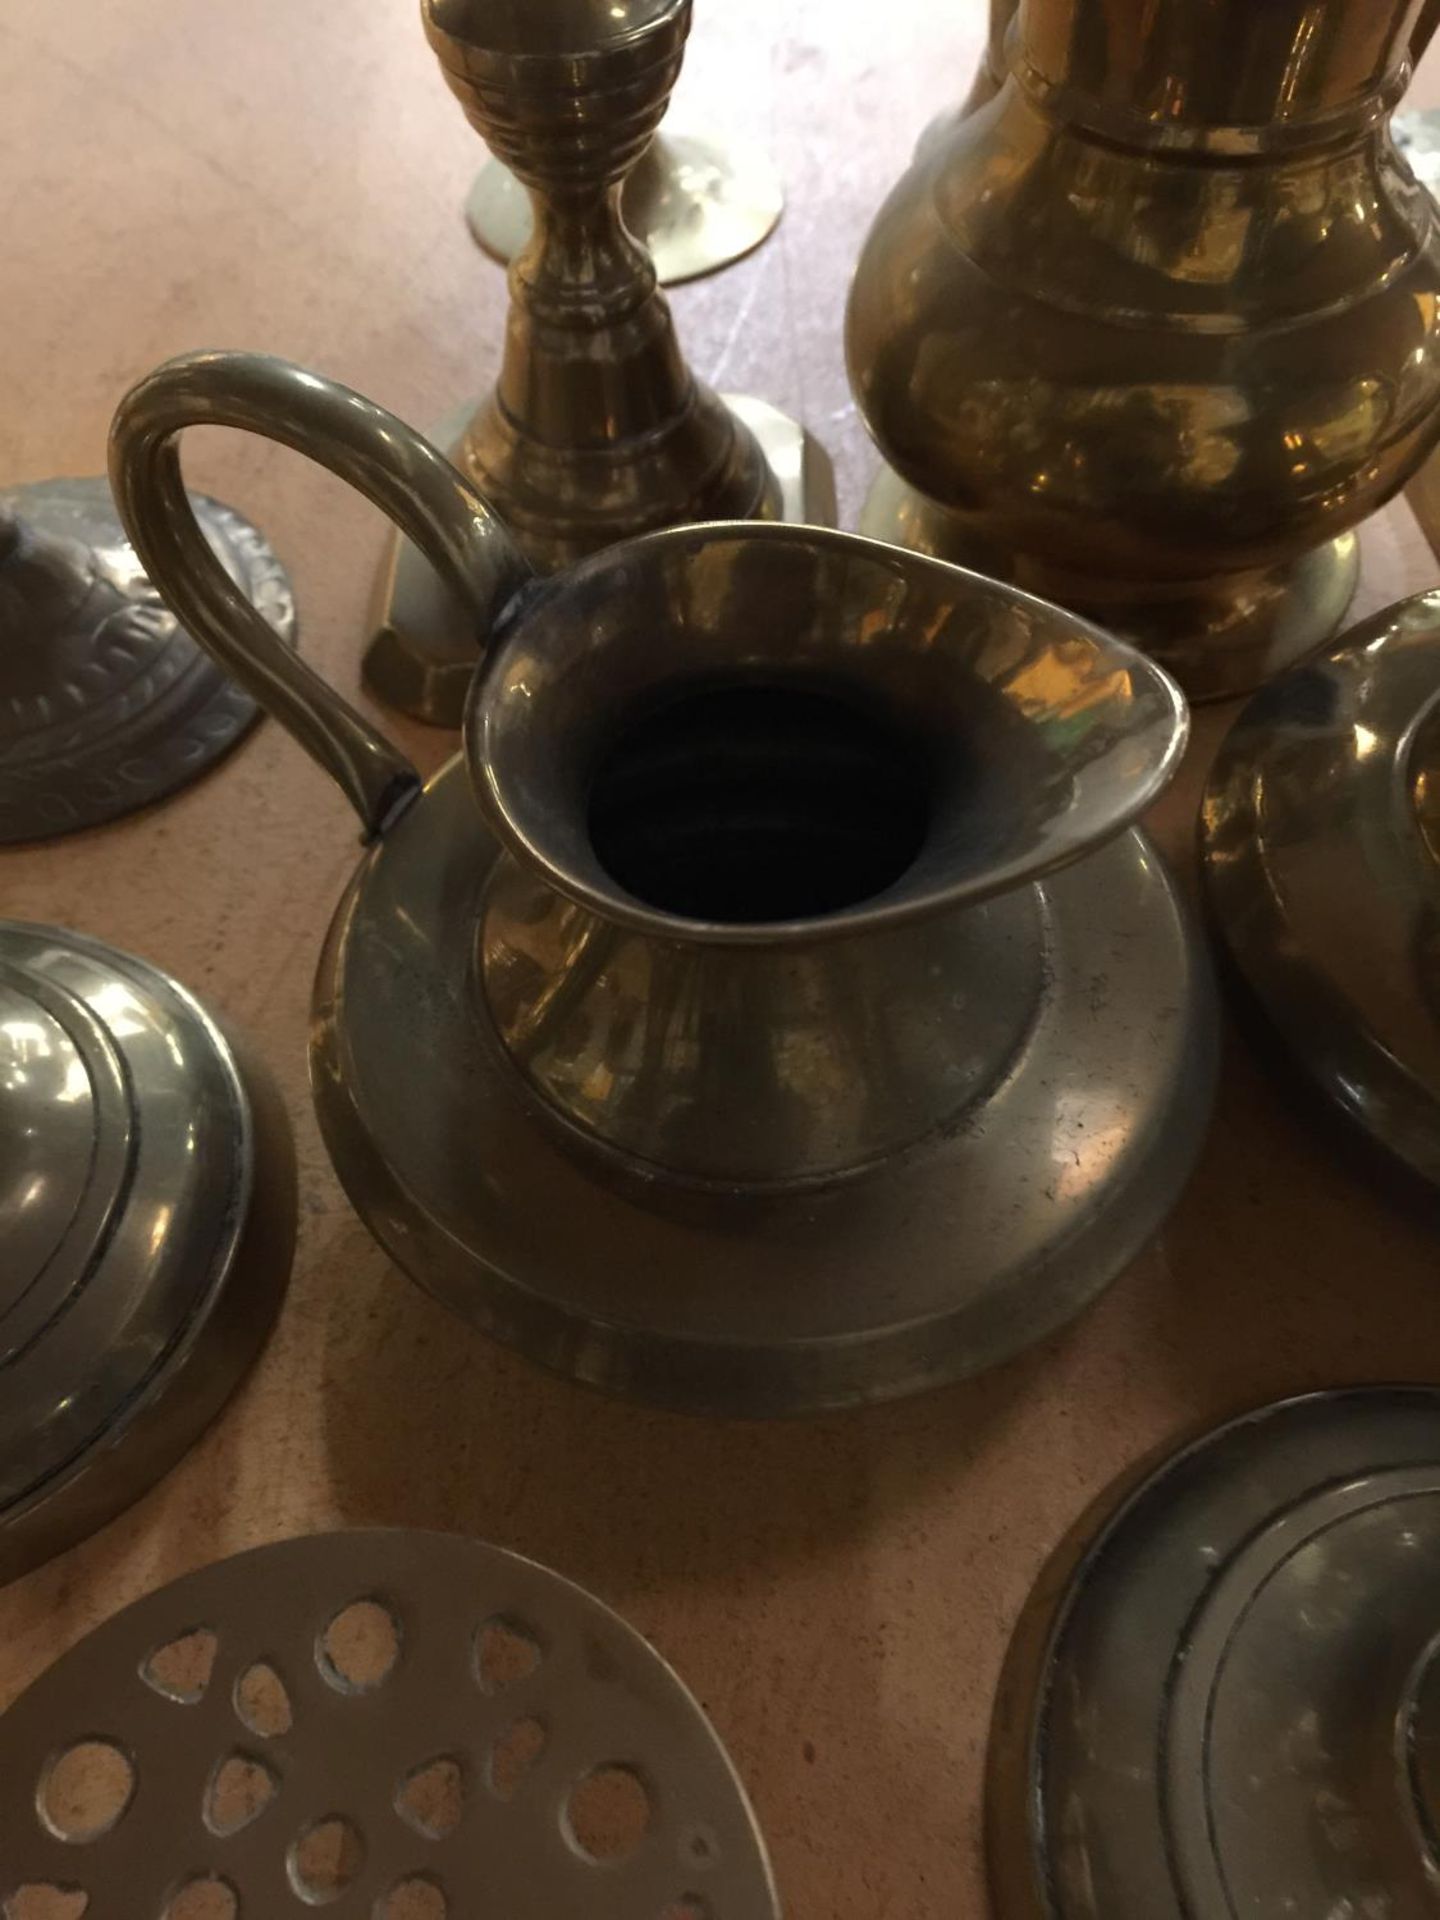 A QUANTITY OF BRASSWARE TO INCLUDE CANDLESTICKS, TRIVETS, GOBLETS, JUGS, VASE, ETC - Image 2 of 3